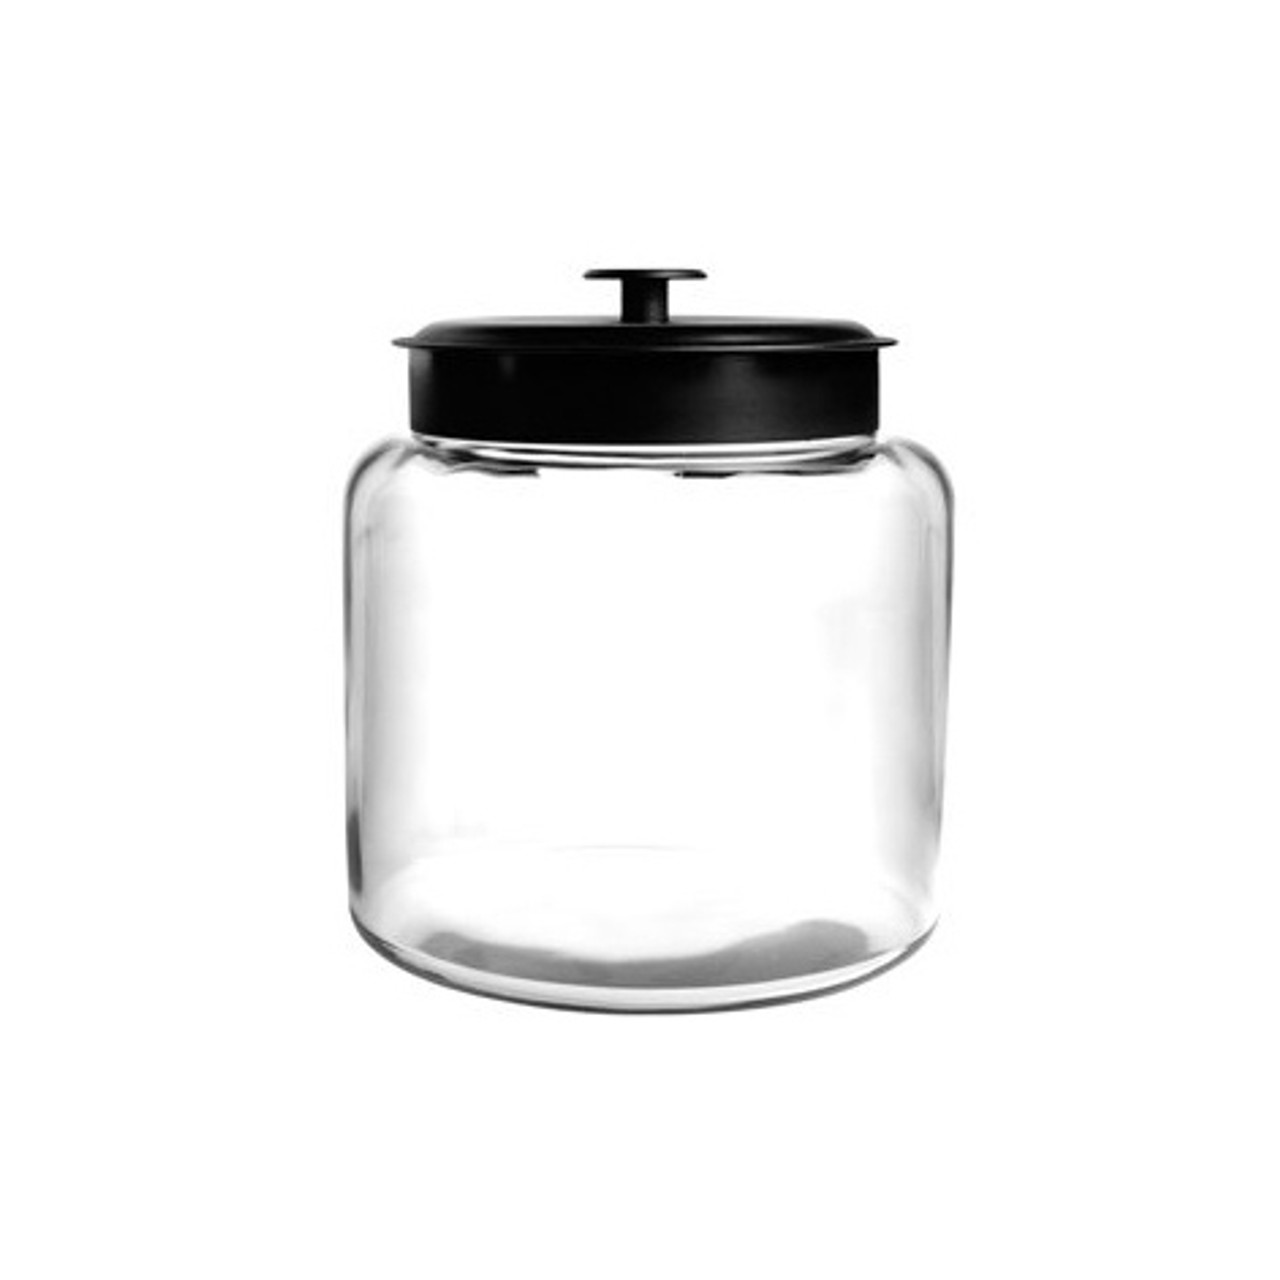 2 Gallon Anchor Heritage Hill Jar with Glass Lid